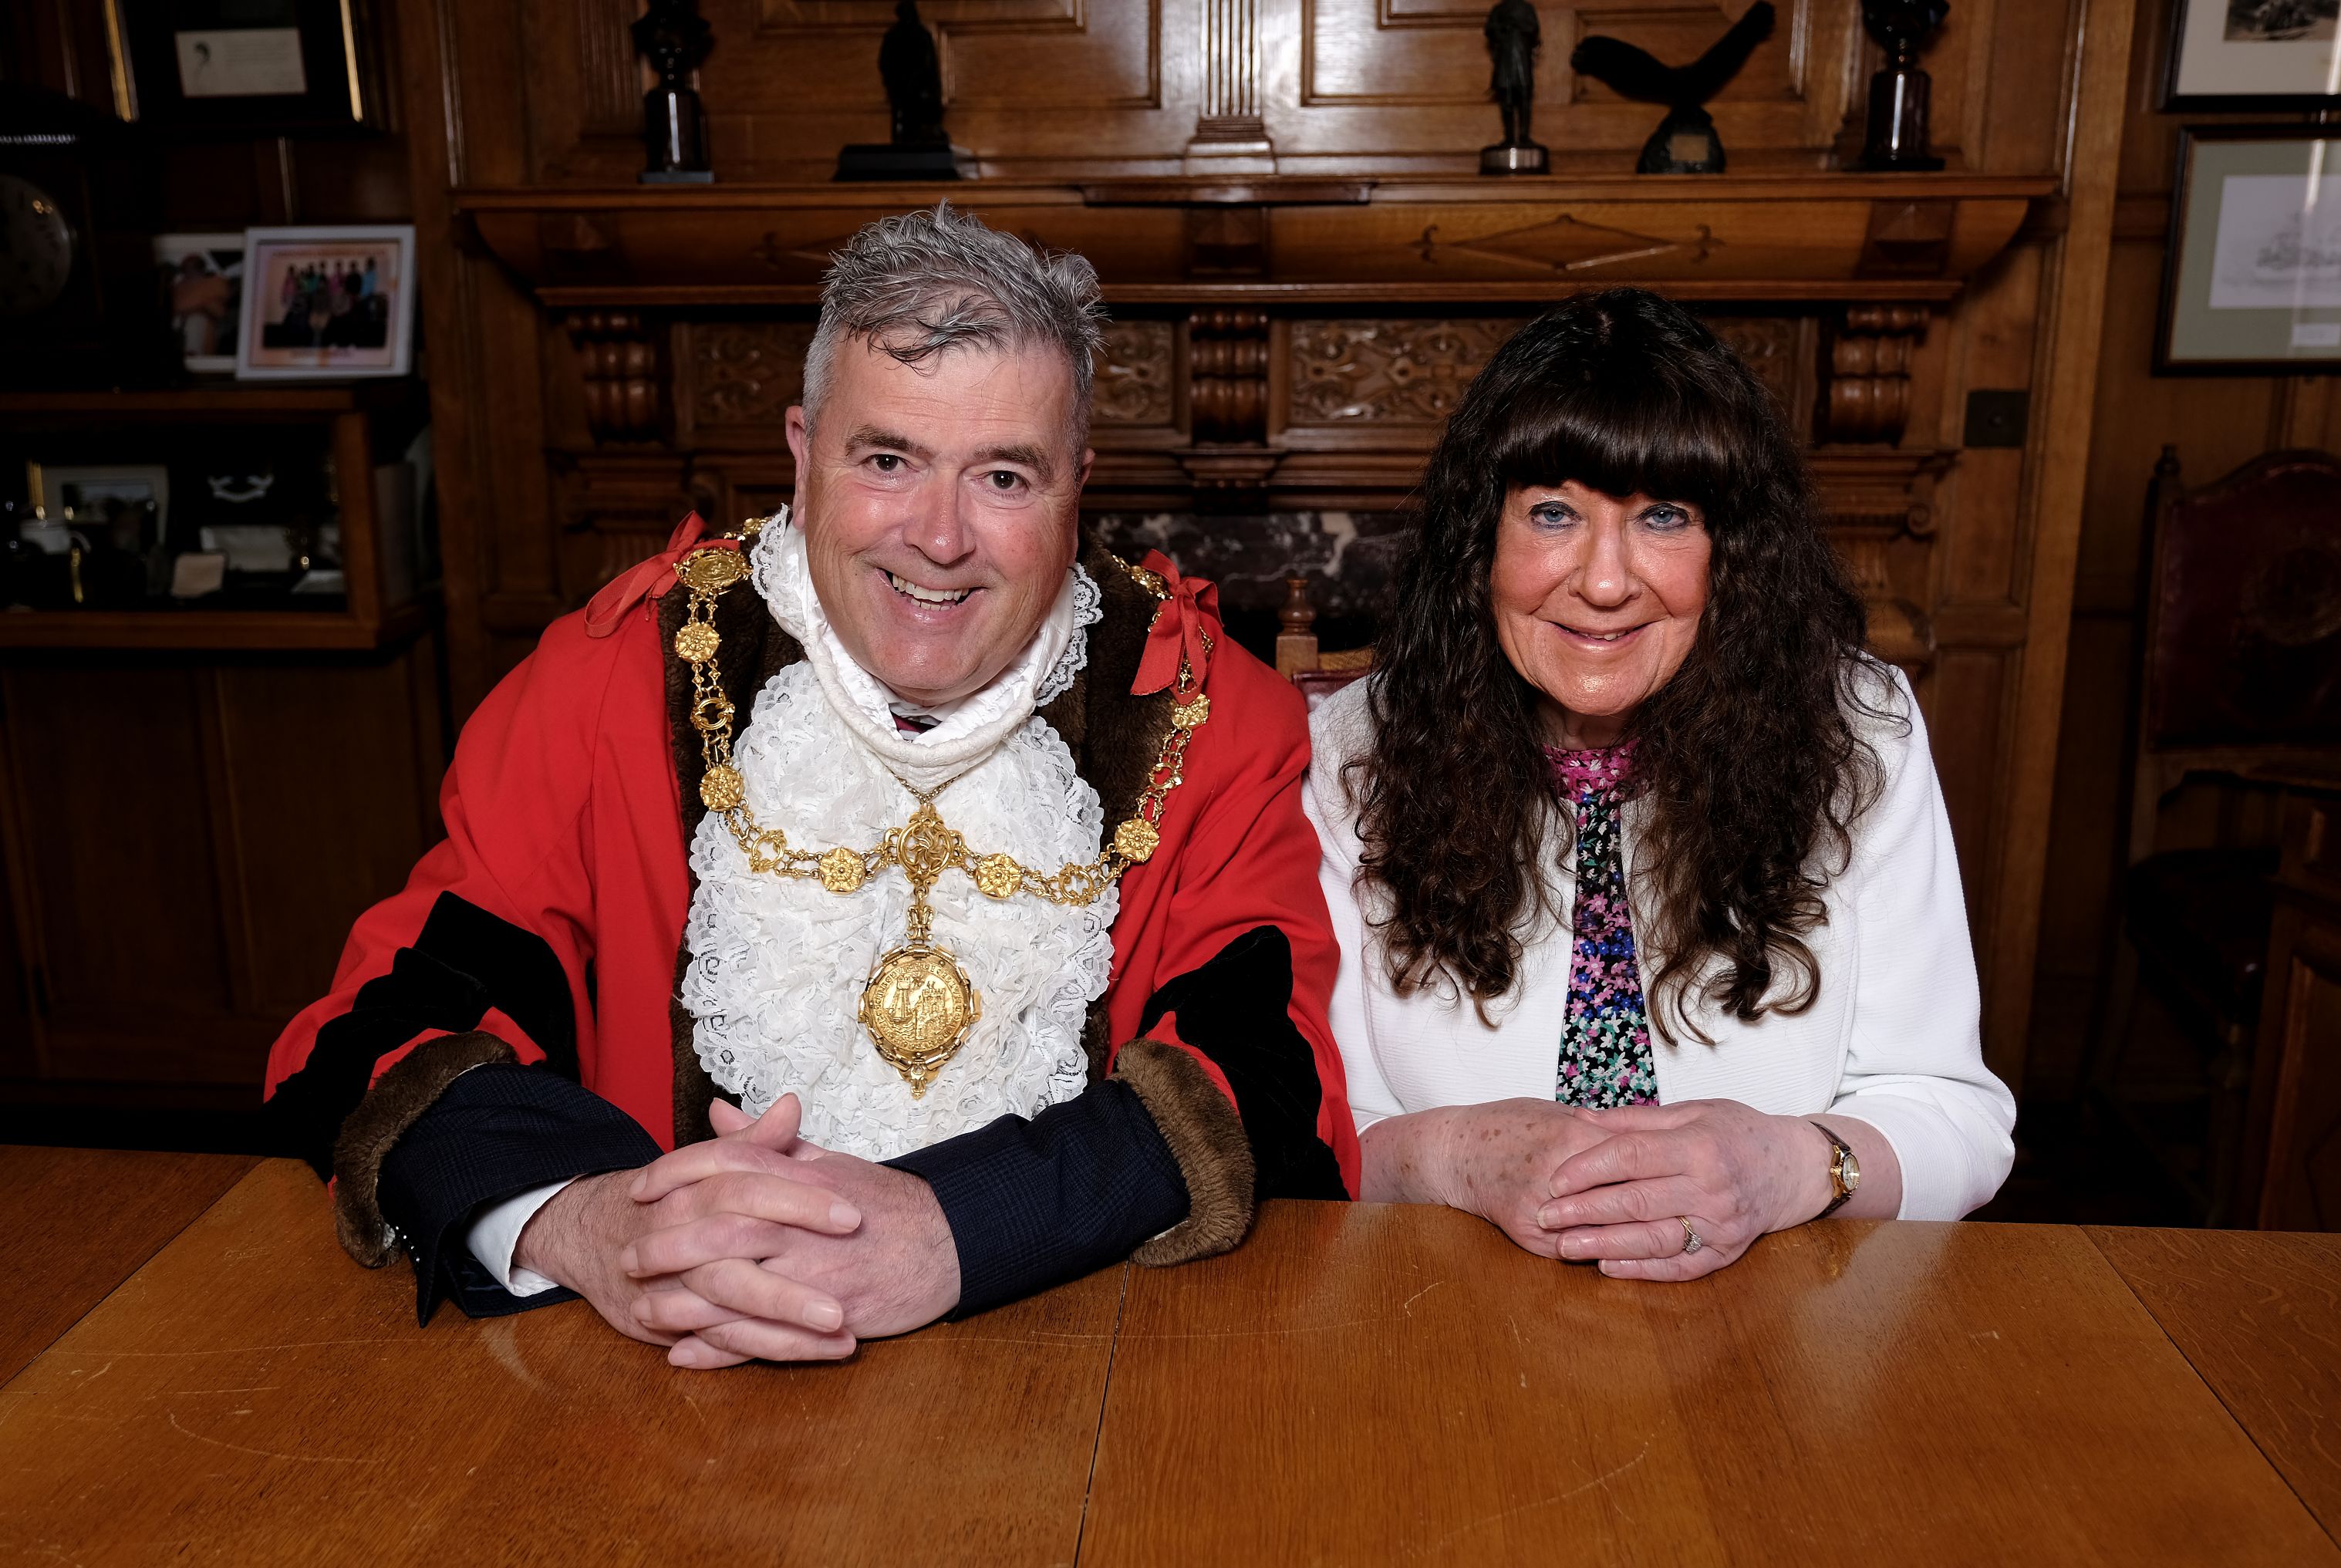 The Charter Mayor for Scarborough, Cllr John Ritchie, with the Deputy Charter Mayor, Cllr Janet Jefferson. 